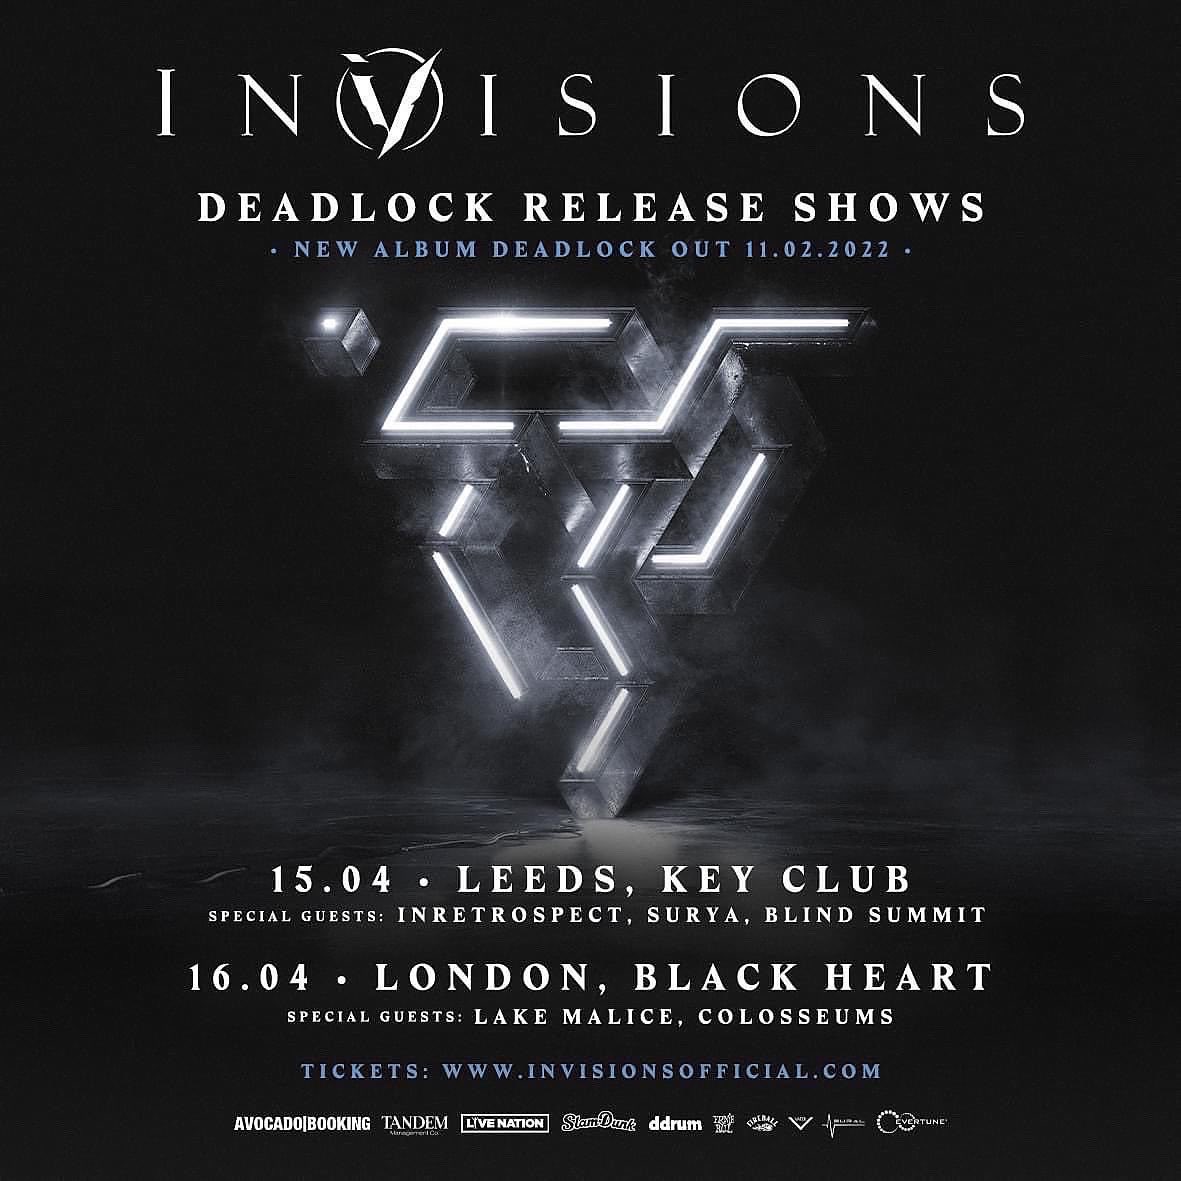 //:: LIMITED TICKETS; - Leeds this one is super close to selling out, help us in giving @InVisionstweets the best album launch party! - E M B R A C E ♾ E T E R N I T Y